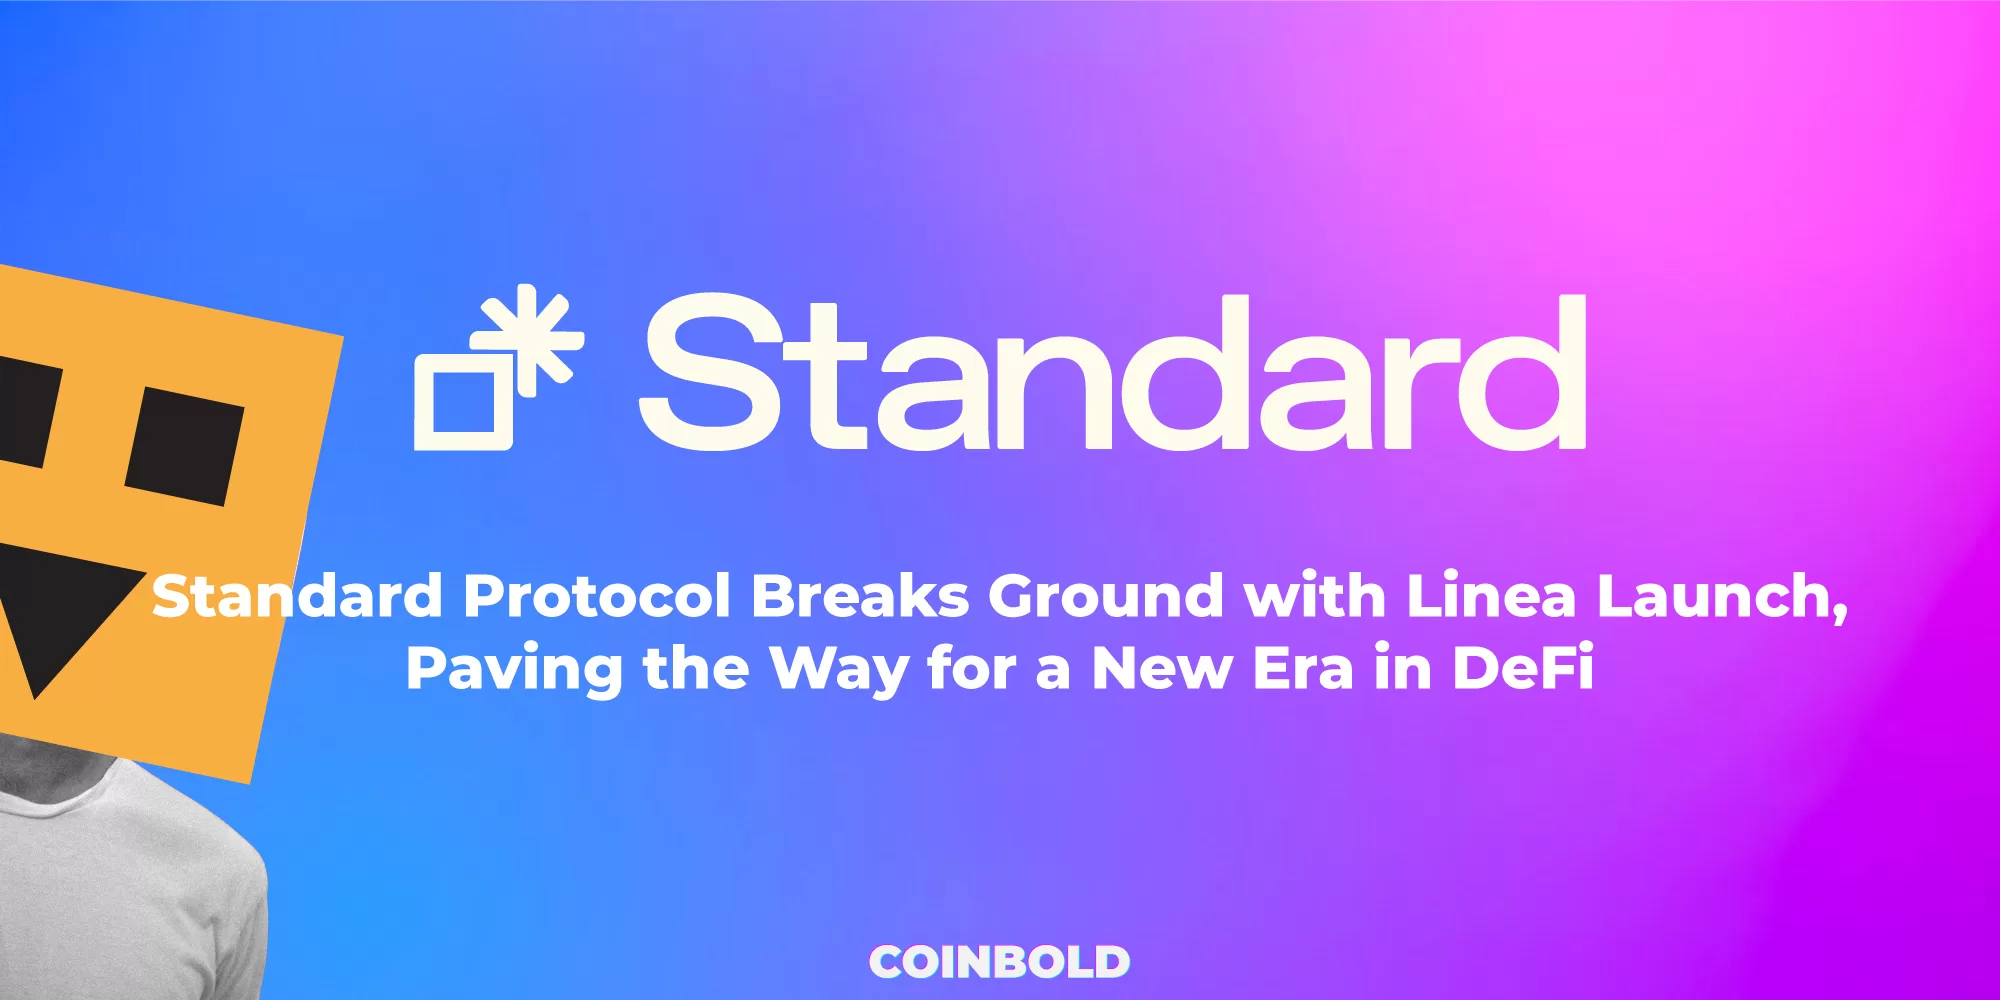 Standard Protocol Breaks Ground with Linea Launch, Paving the Way for a New Era in DeFi